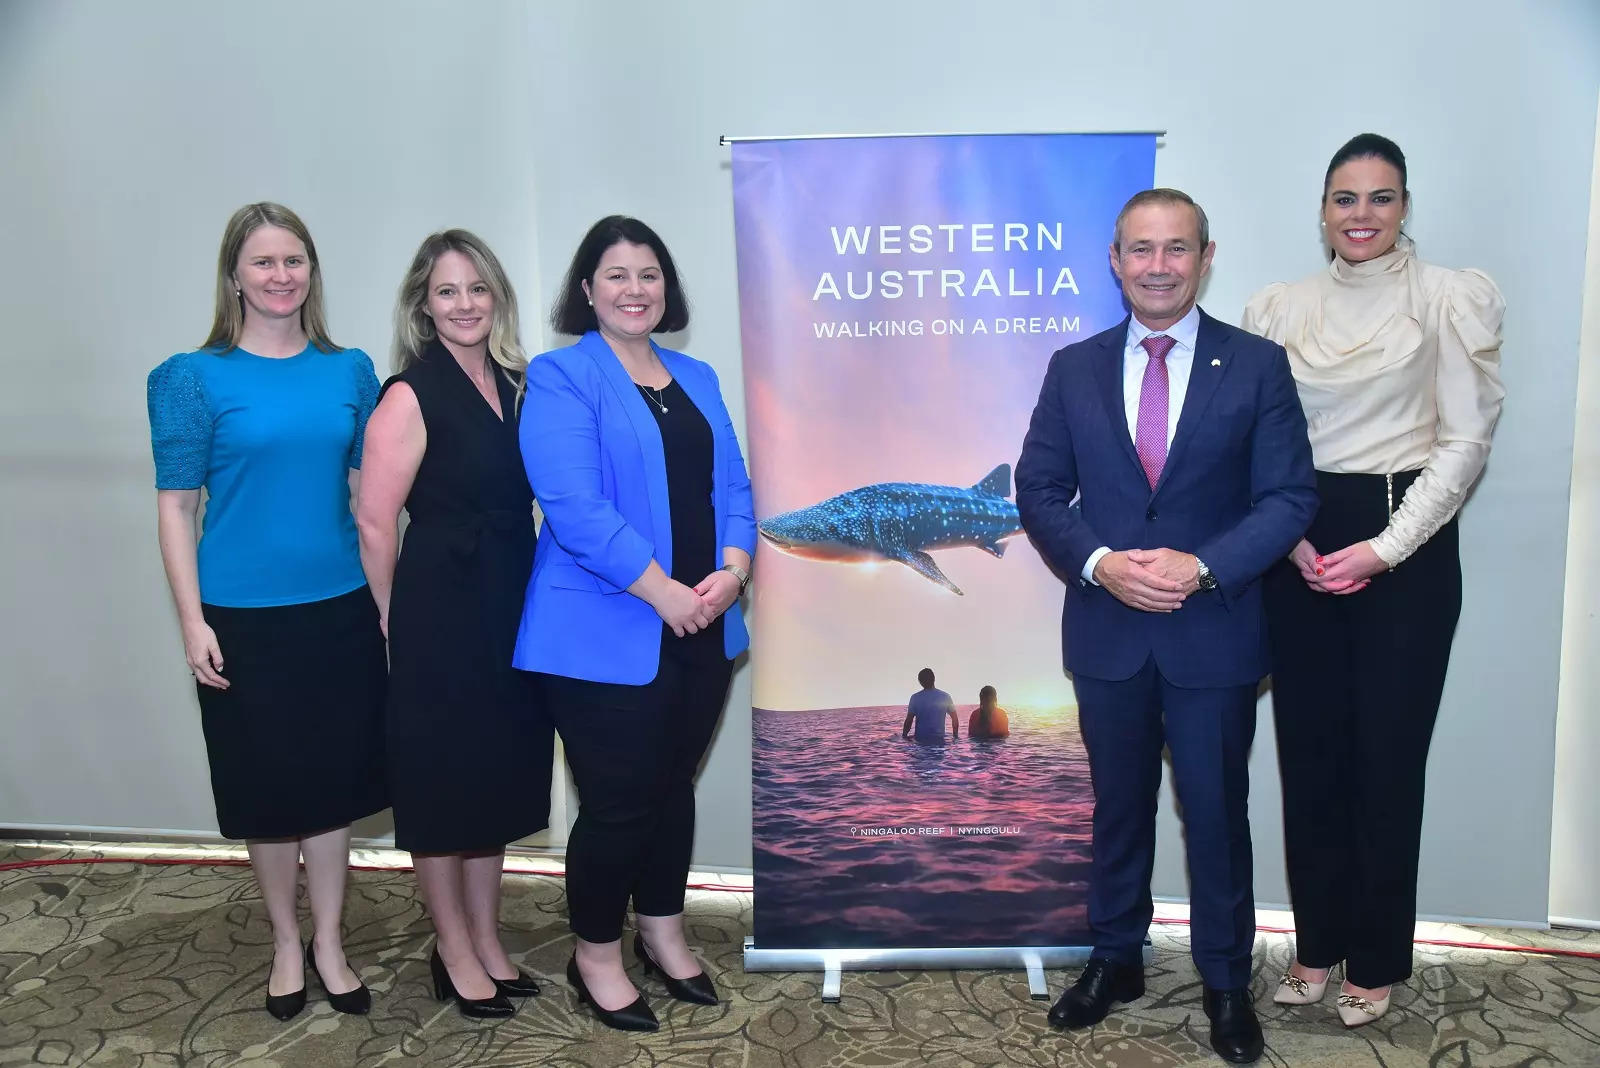 <p>(L-R): Stephanie Juszkiewicz, Senior VP Aviation Business Development, Perth Airport; Jessica Woodford, Senior Manager Aviation Marketing, Tourism Western Australia; Kate Holsgrove, Acting Chief Executive Officer, Perth Airport; Hon Roger Cook MLA, Deputy Premier; Minister for Tourism; Carolyn Turnbull, Managing Director, Tourism Western Australia<span class="redactor-invisible-space">.</span></p>